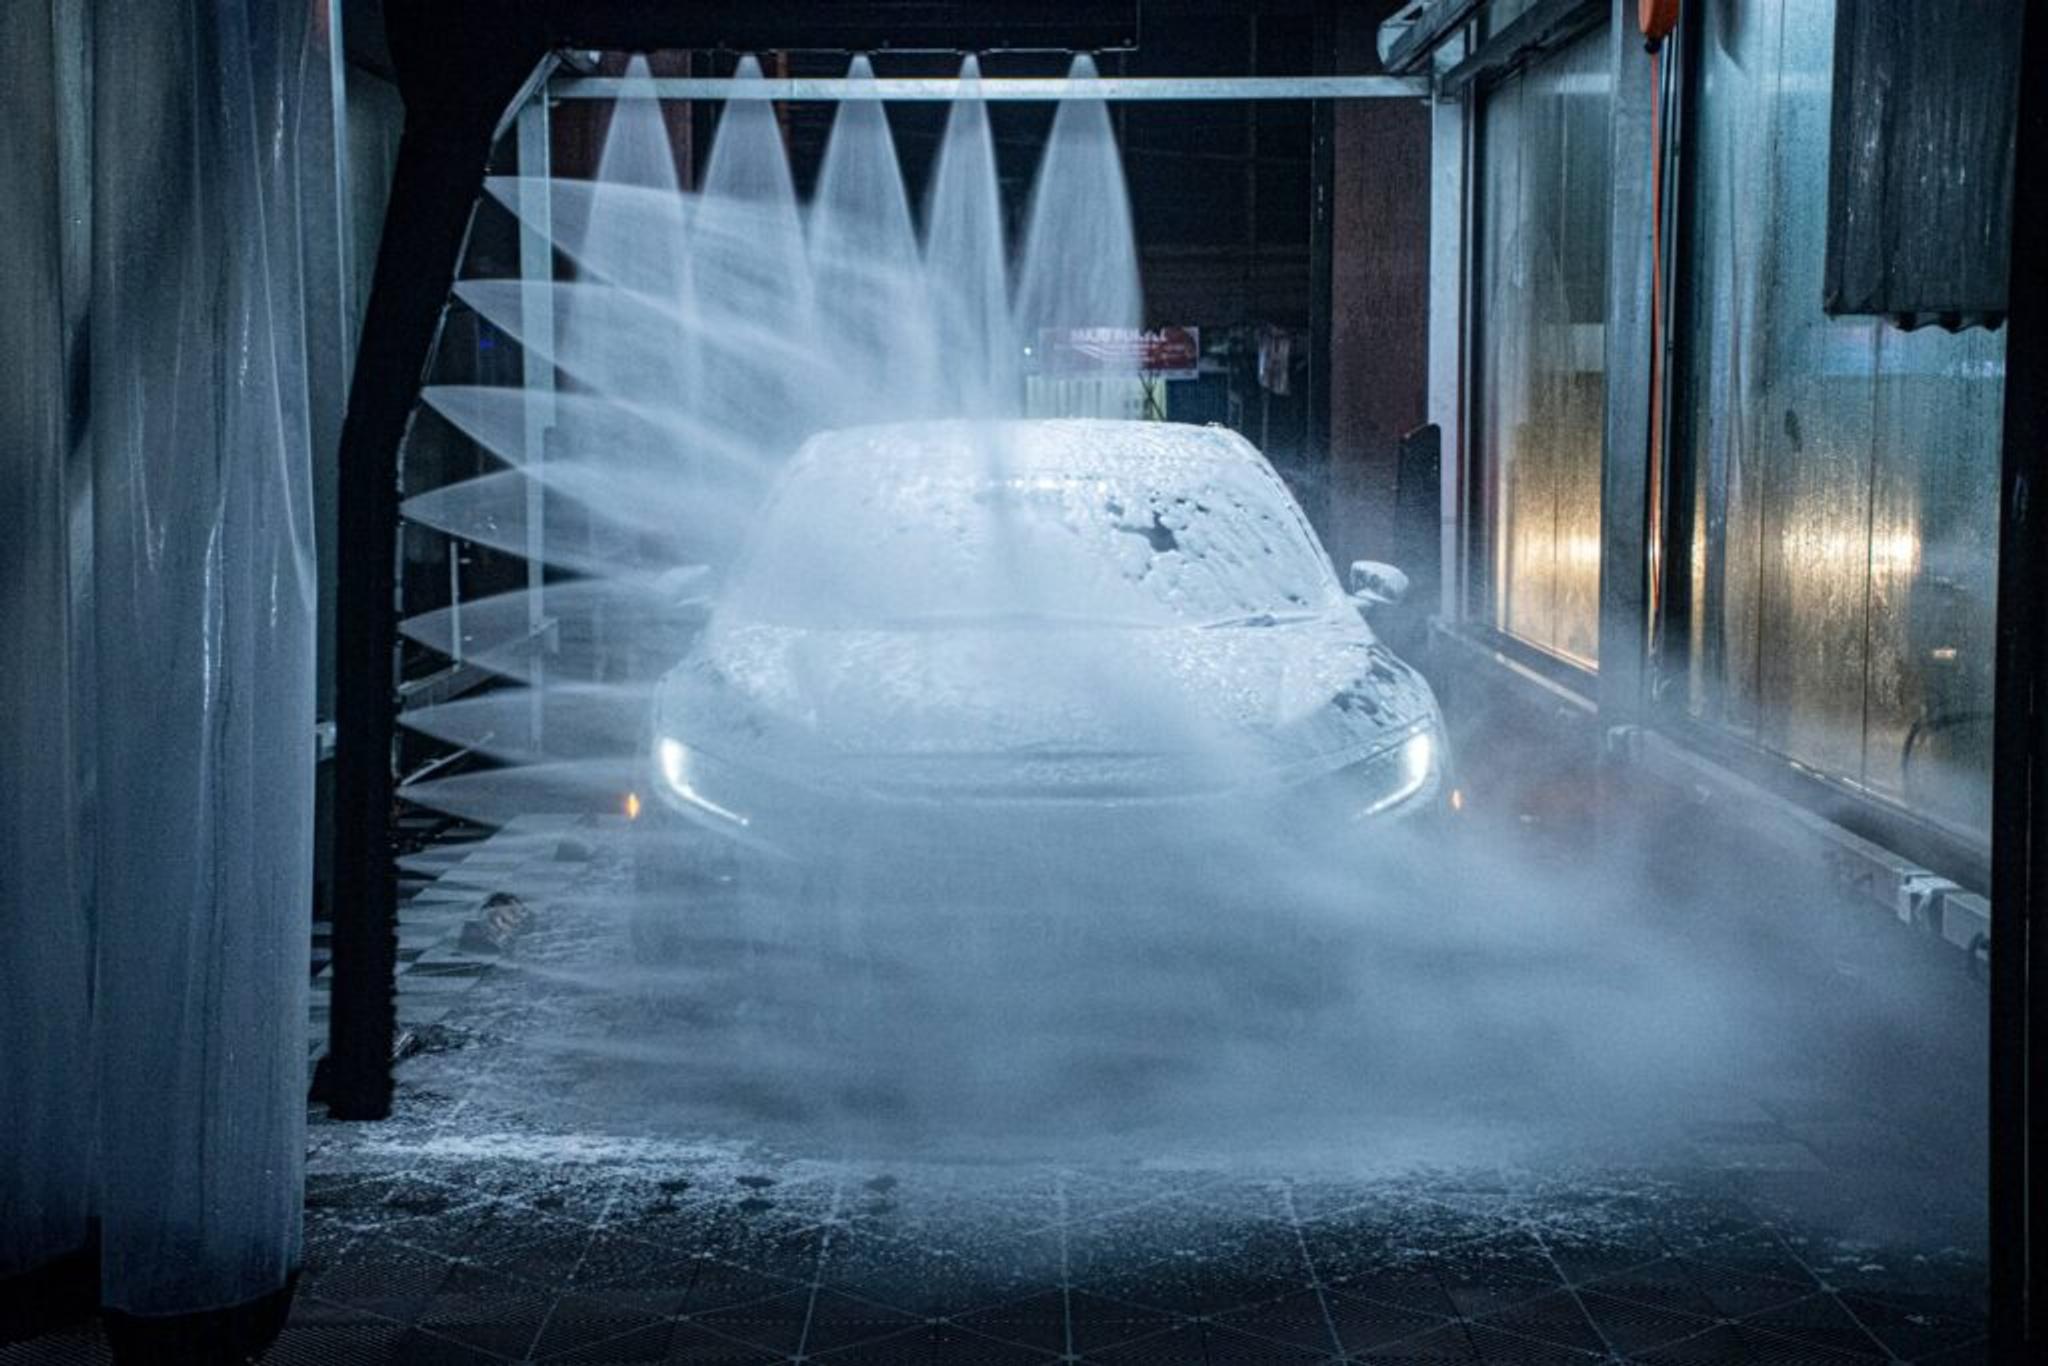 Automatic car wash cleaning a car